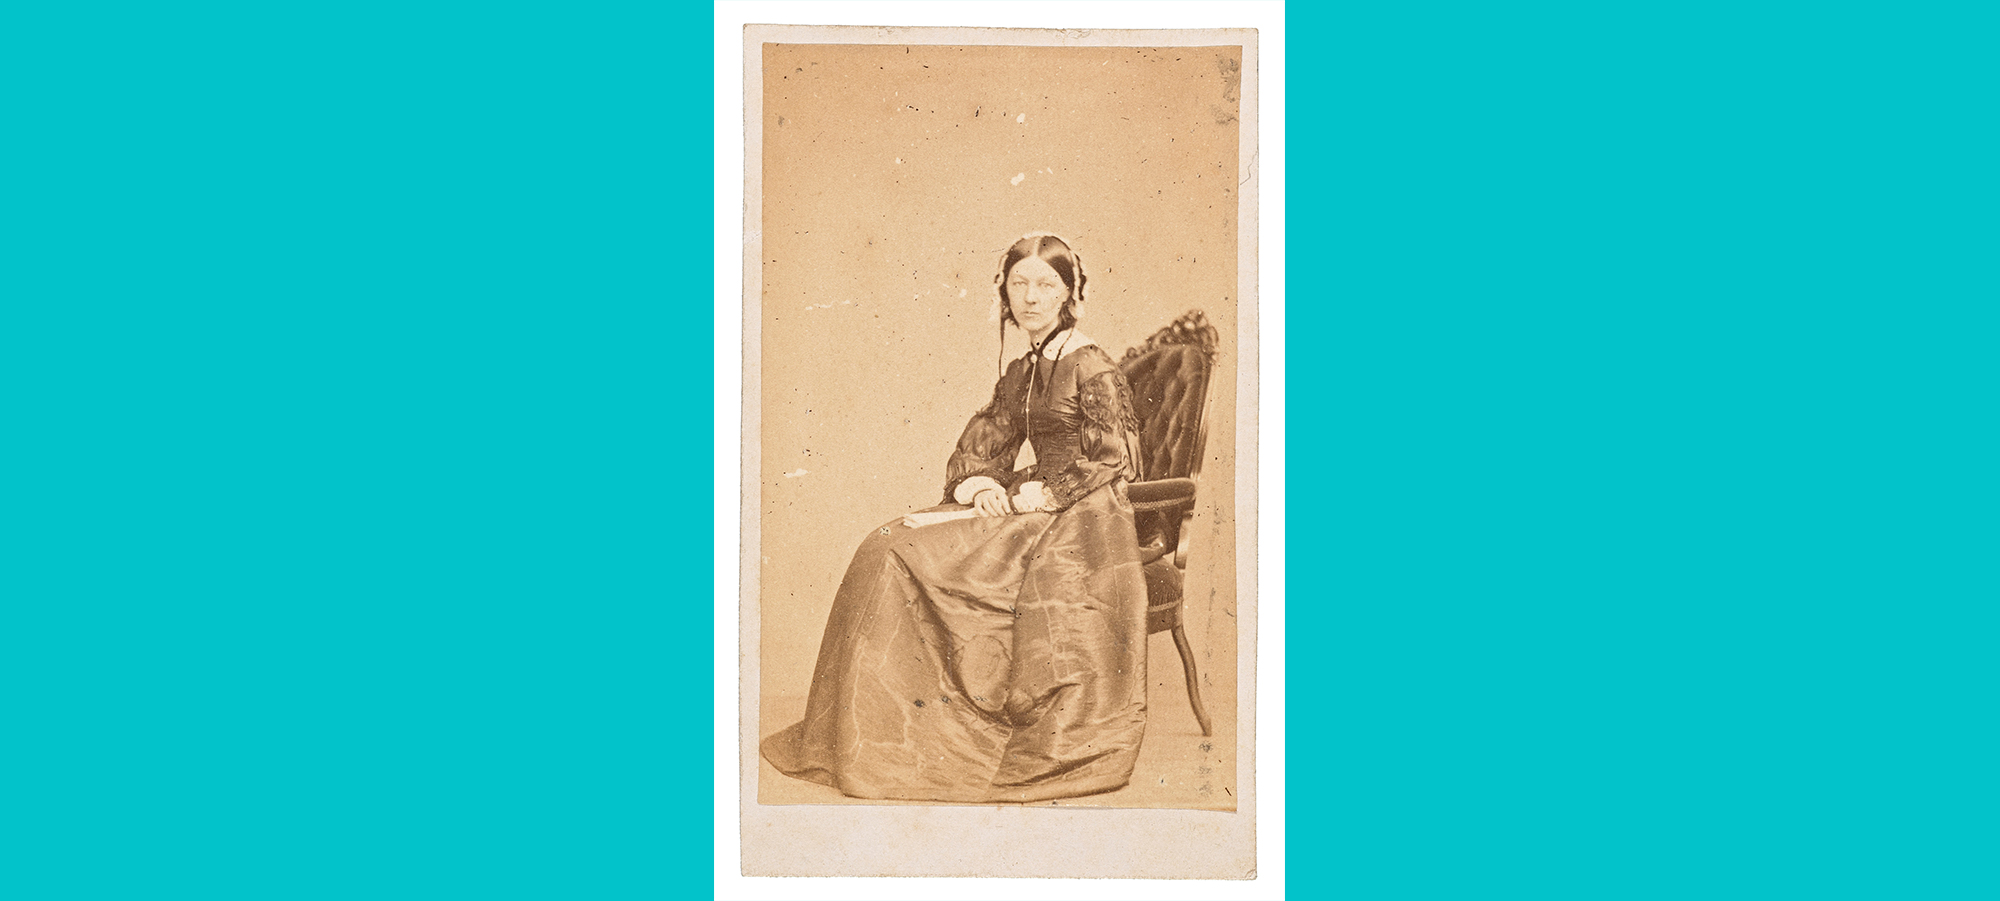 Florence Nightingale photographed seated with head turned at 90 degree angle